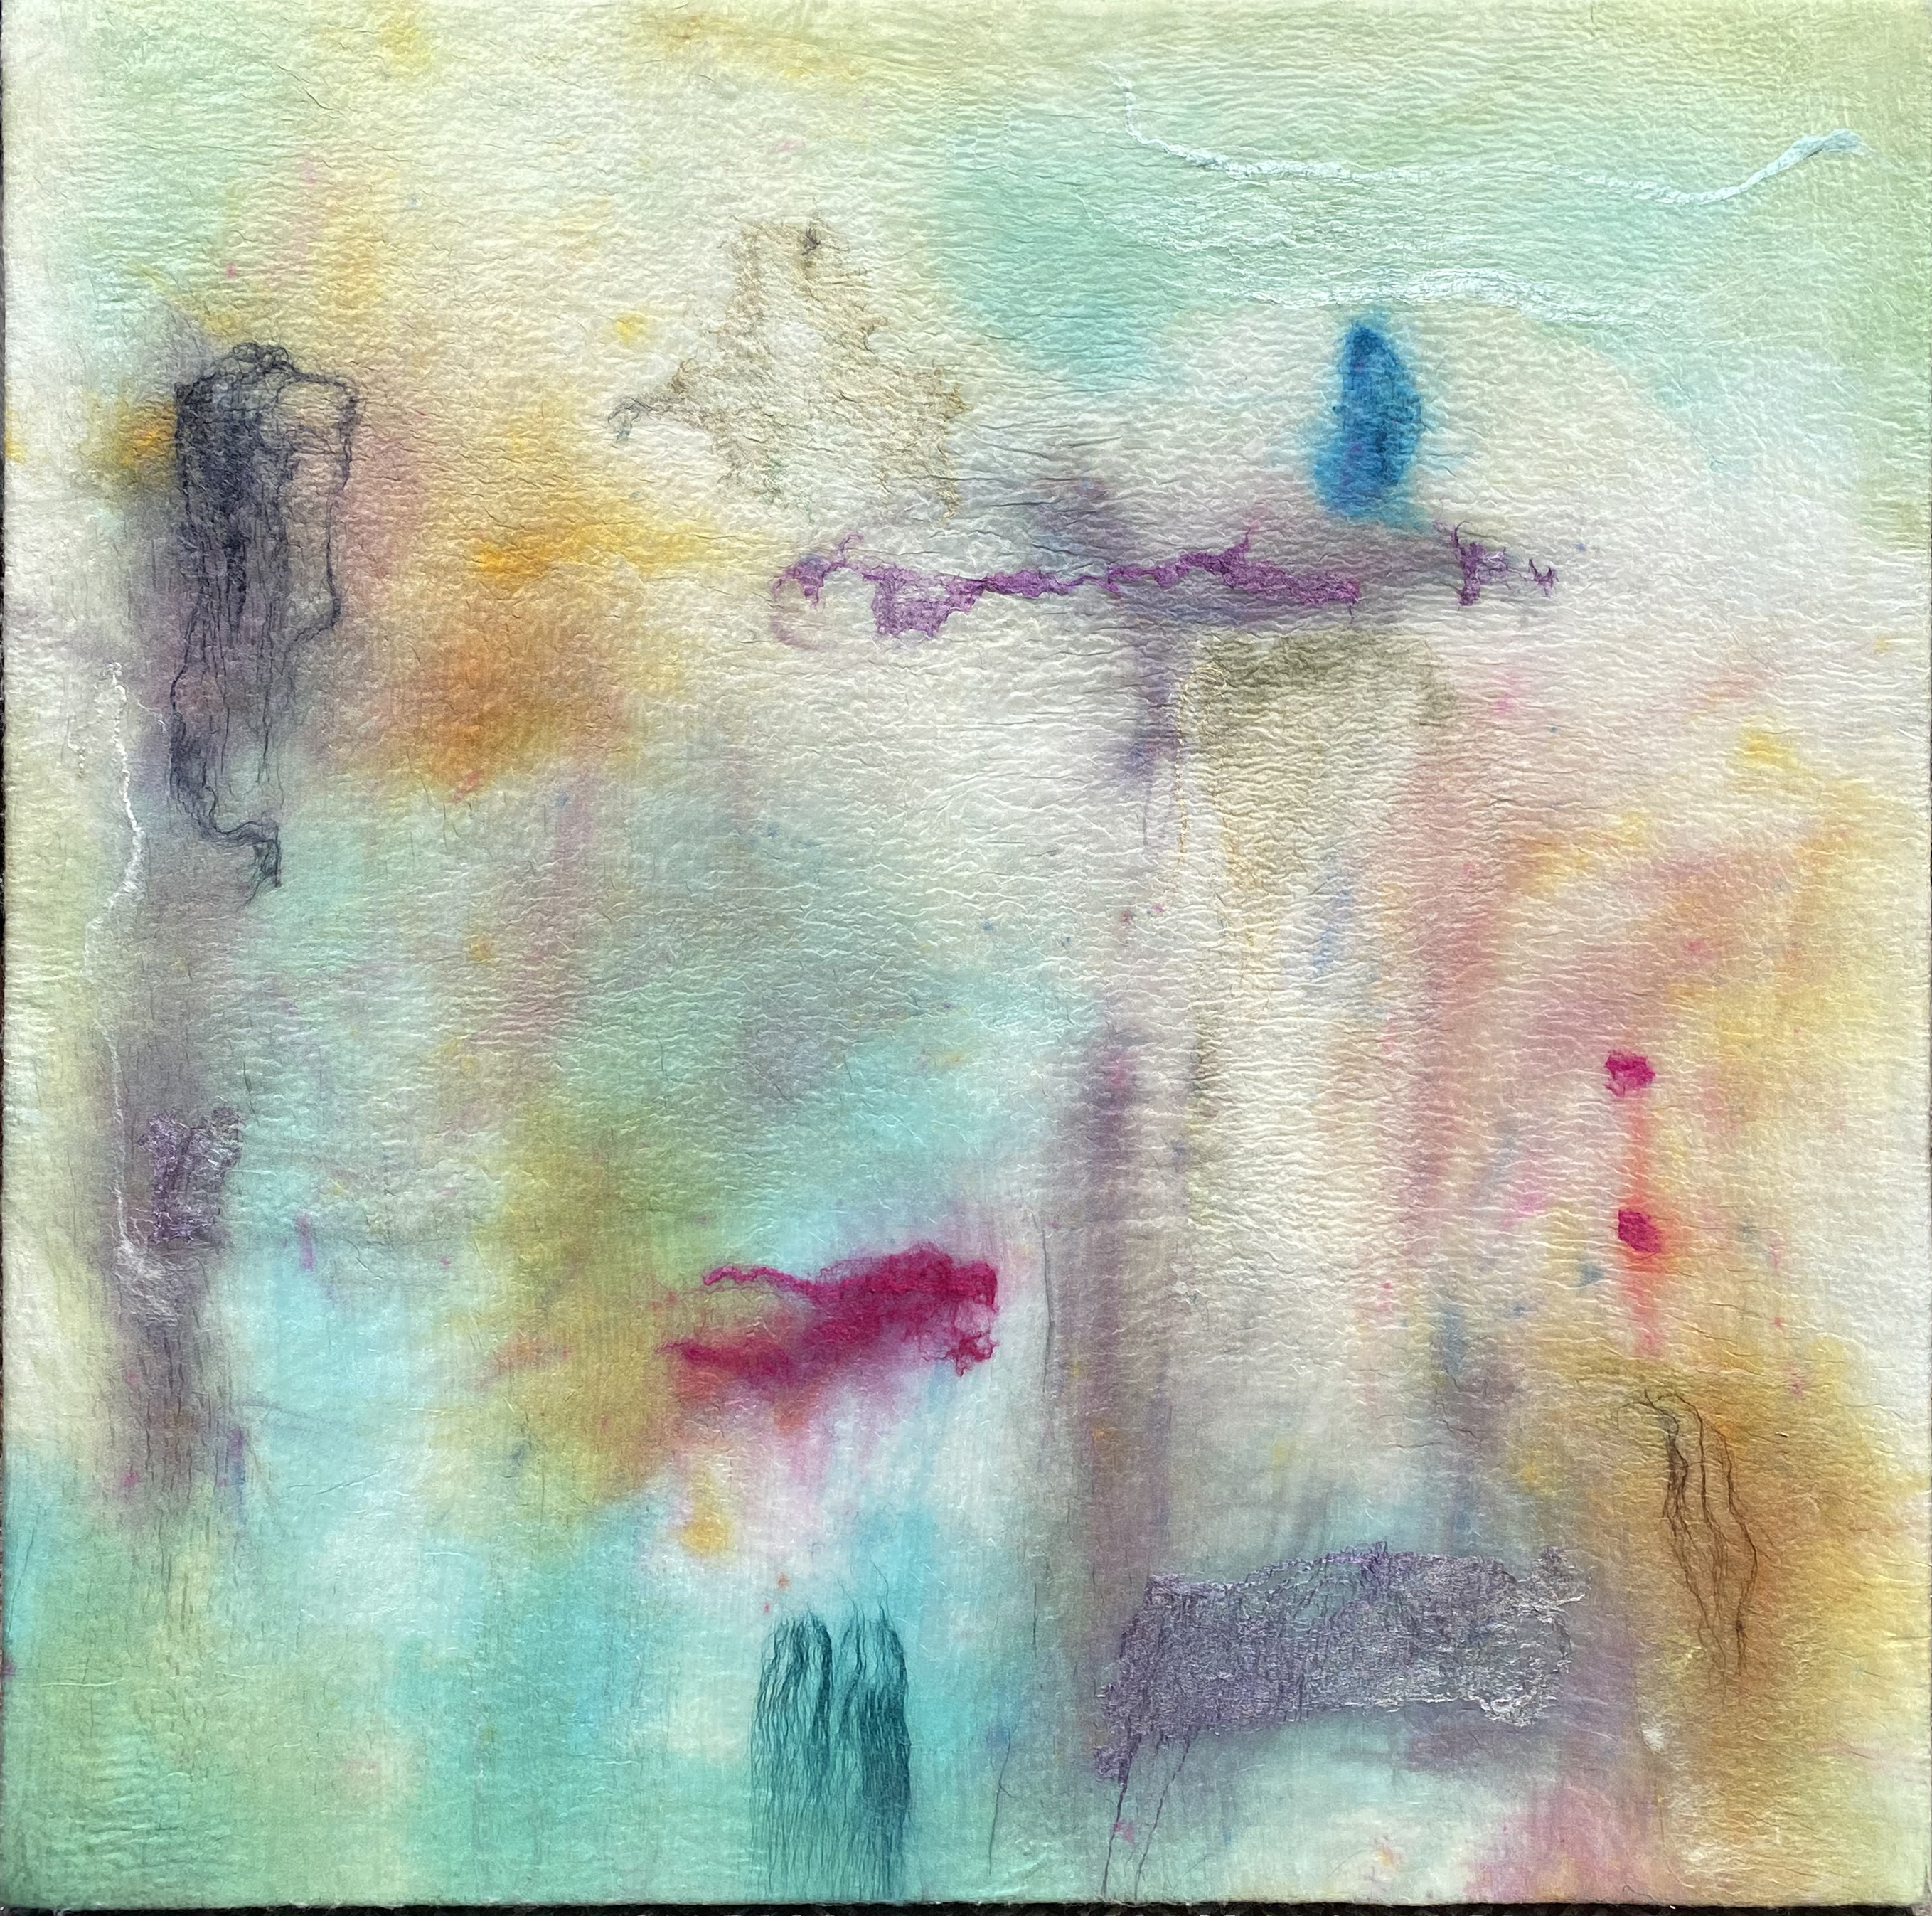 DANCE IN THE RAIN, wool and silk on canvas, 30 x 30 IN